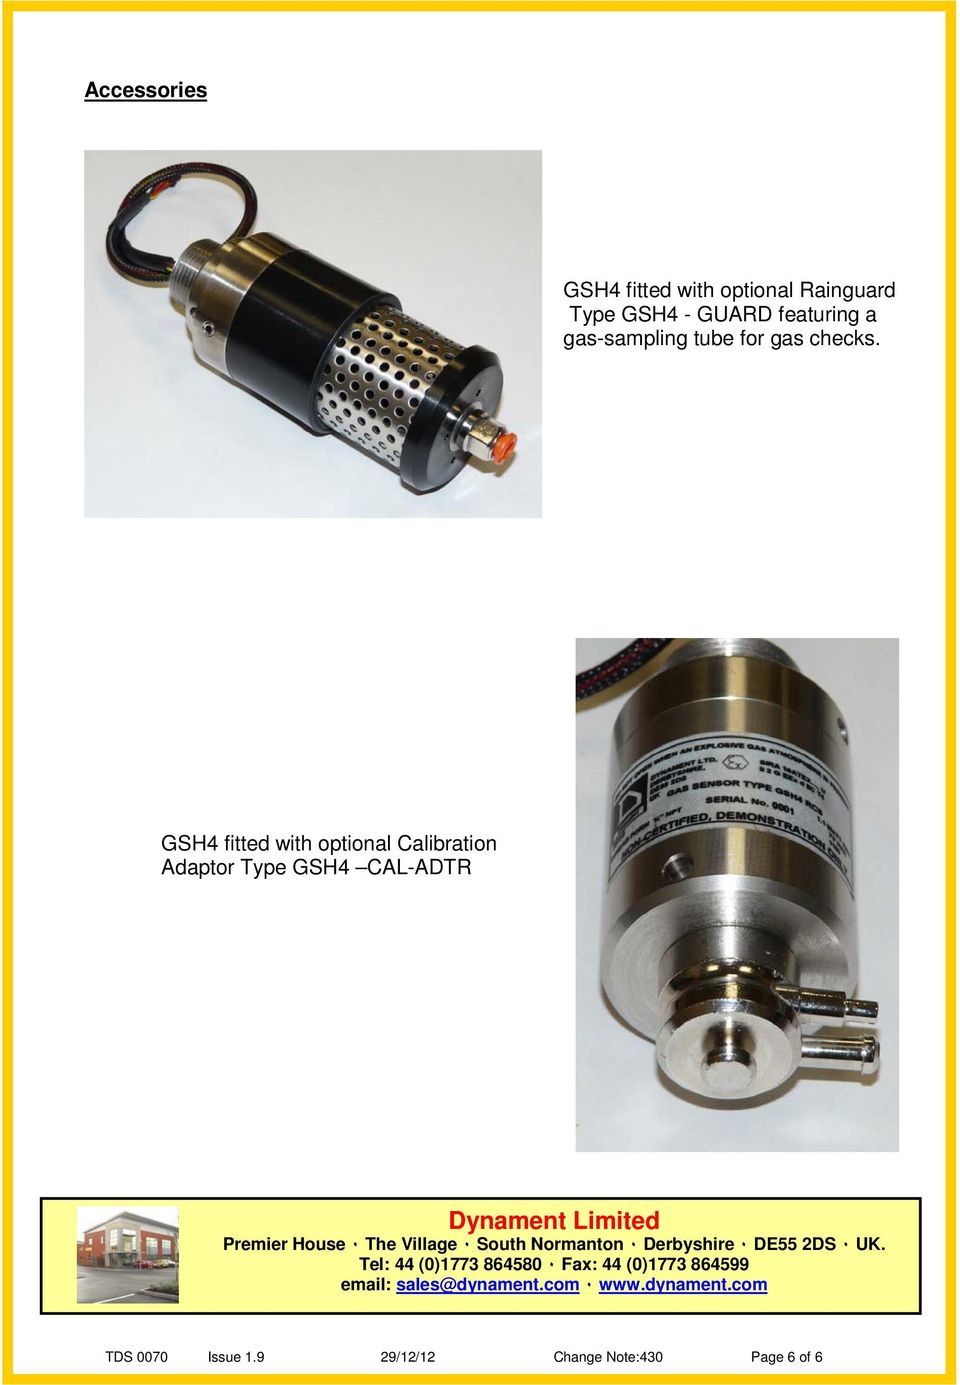 GSH4 fitted with optional Calibration Adaptor Type GSH4 CAL-ADTR Dynament Limited Premier House The